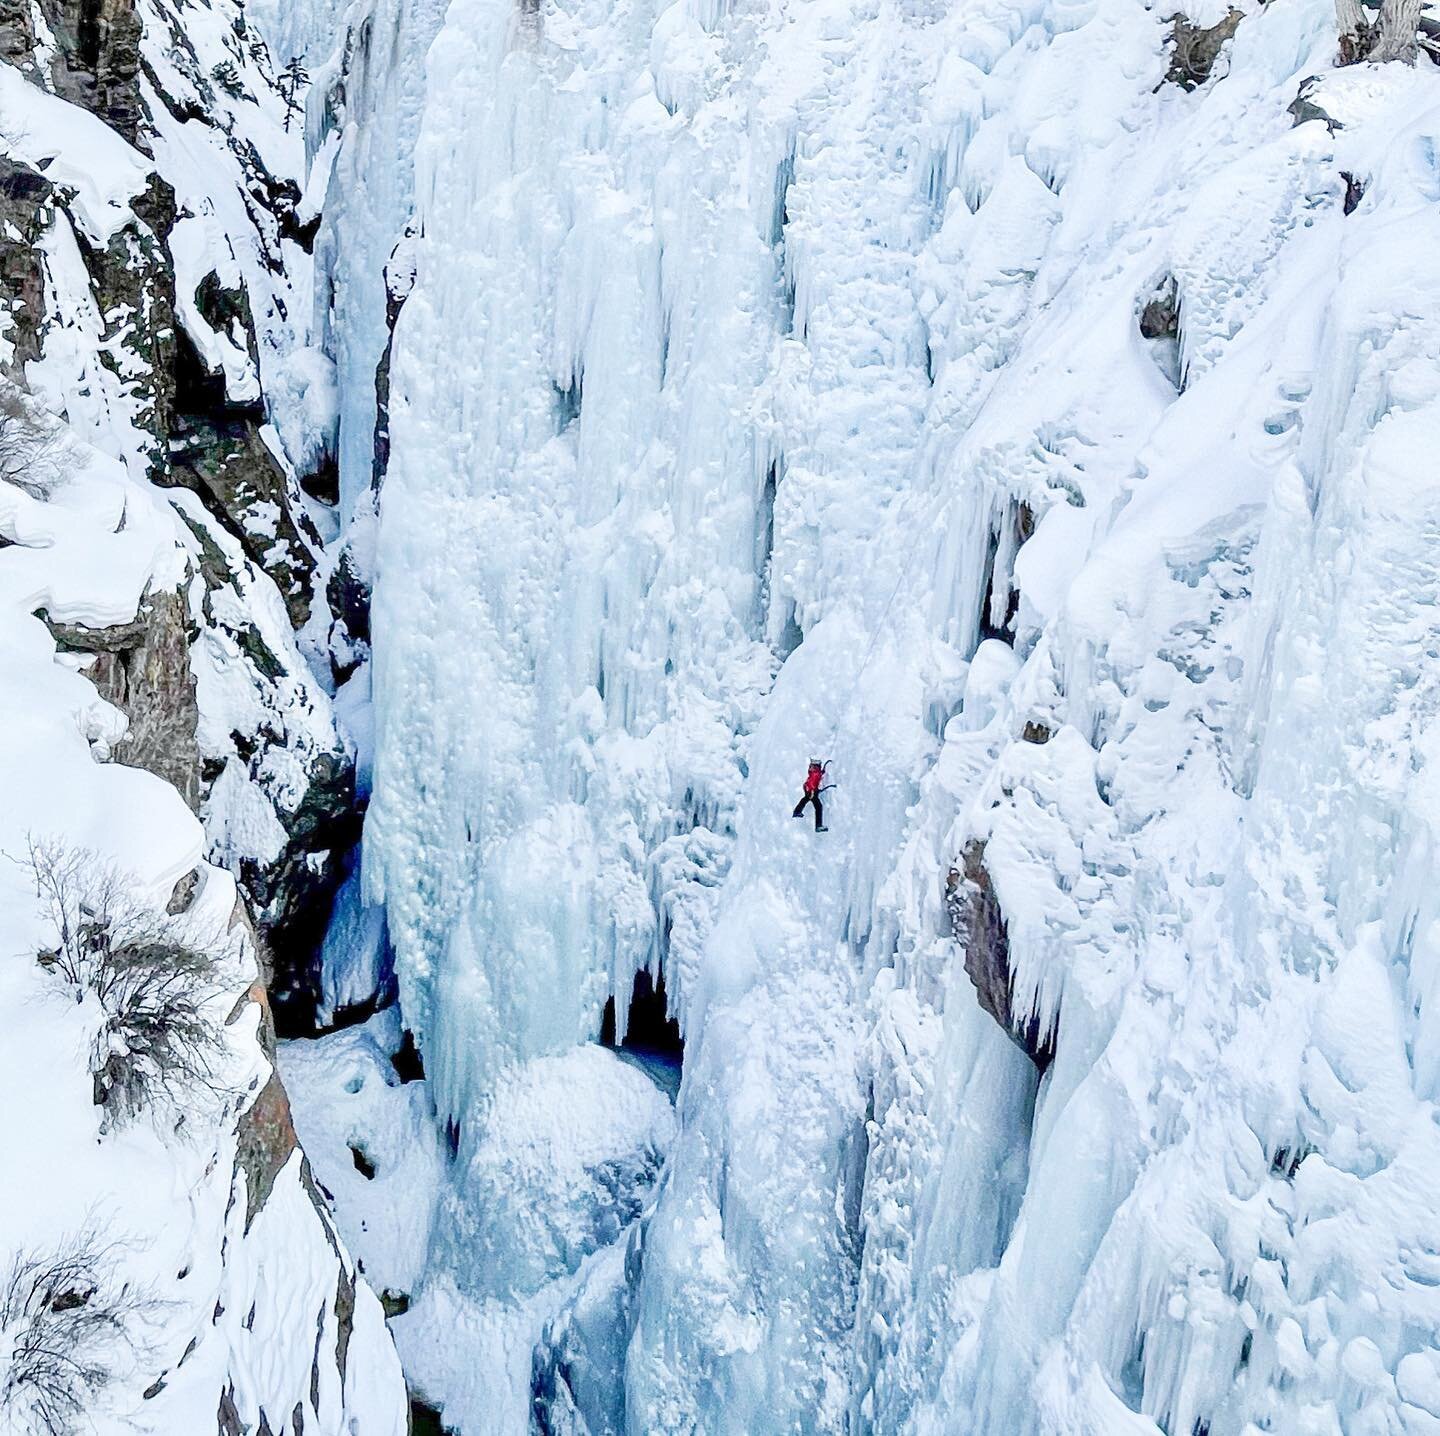 We&rsquo;ll be at the Ouray Ice Fest this week screening @patagonia&rsquo;s film THE SCALE OF HOPE Thursday night! It&rsquo;s a film about reframing the climate narrative, ice climbing in Alaska, and my experience living with Bipolar 2 Disorder. @cap